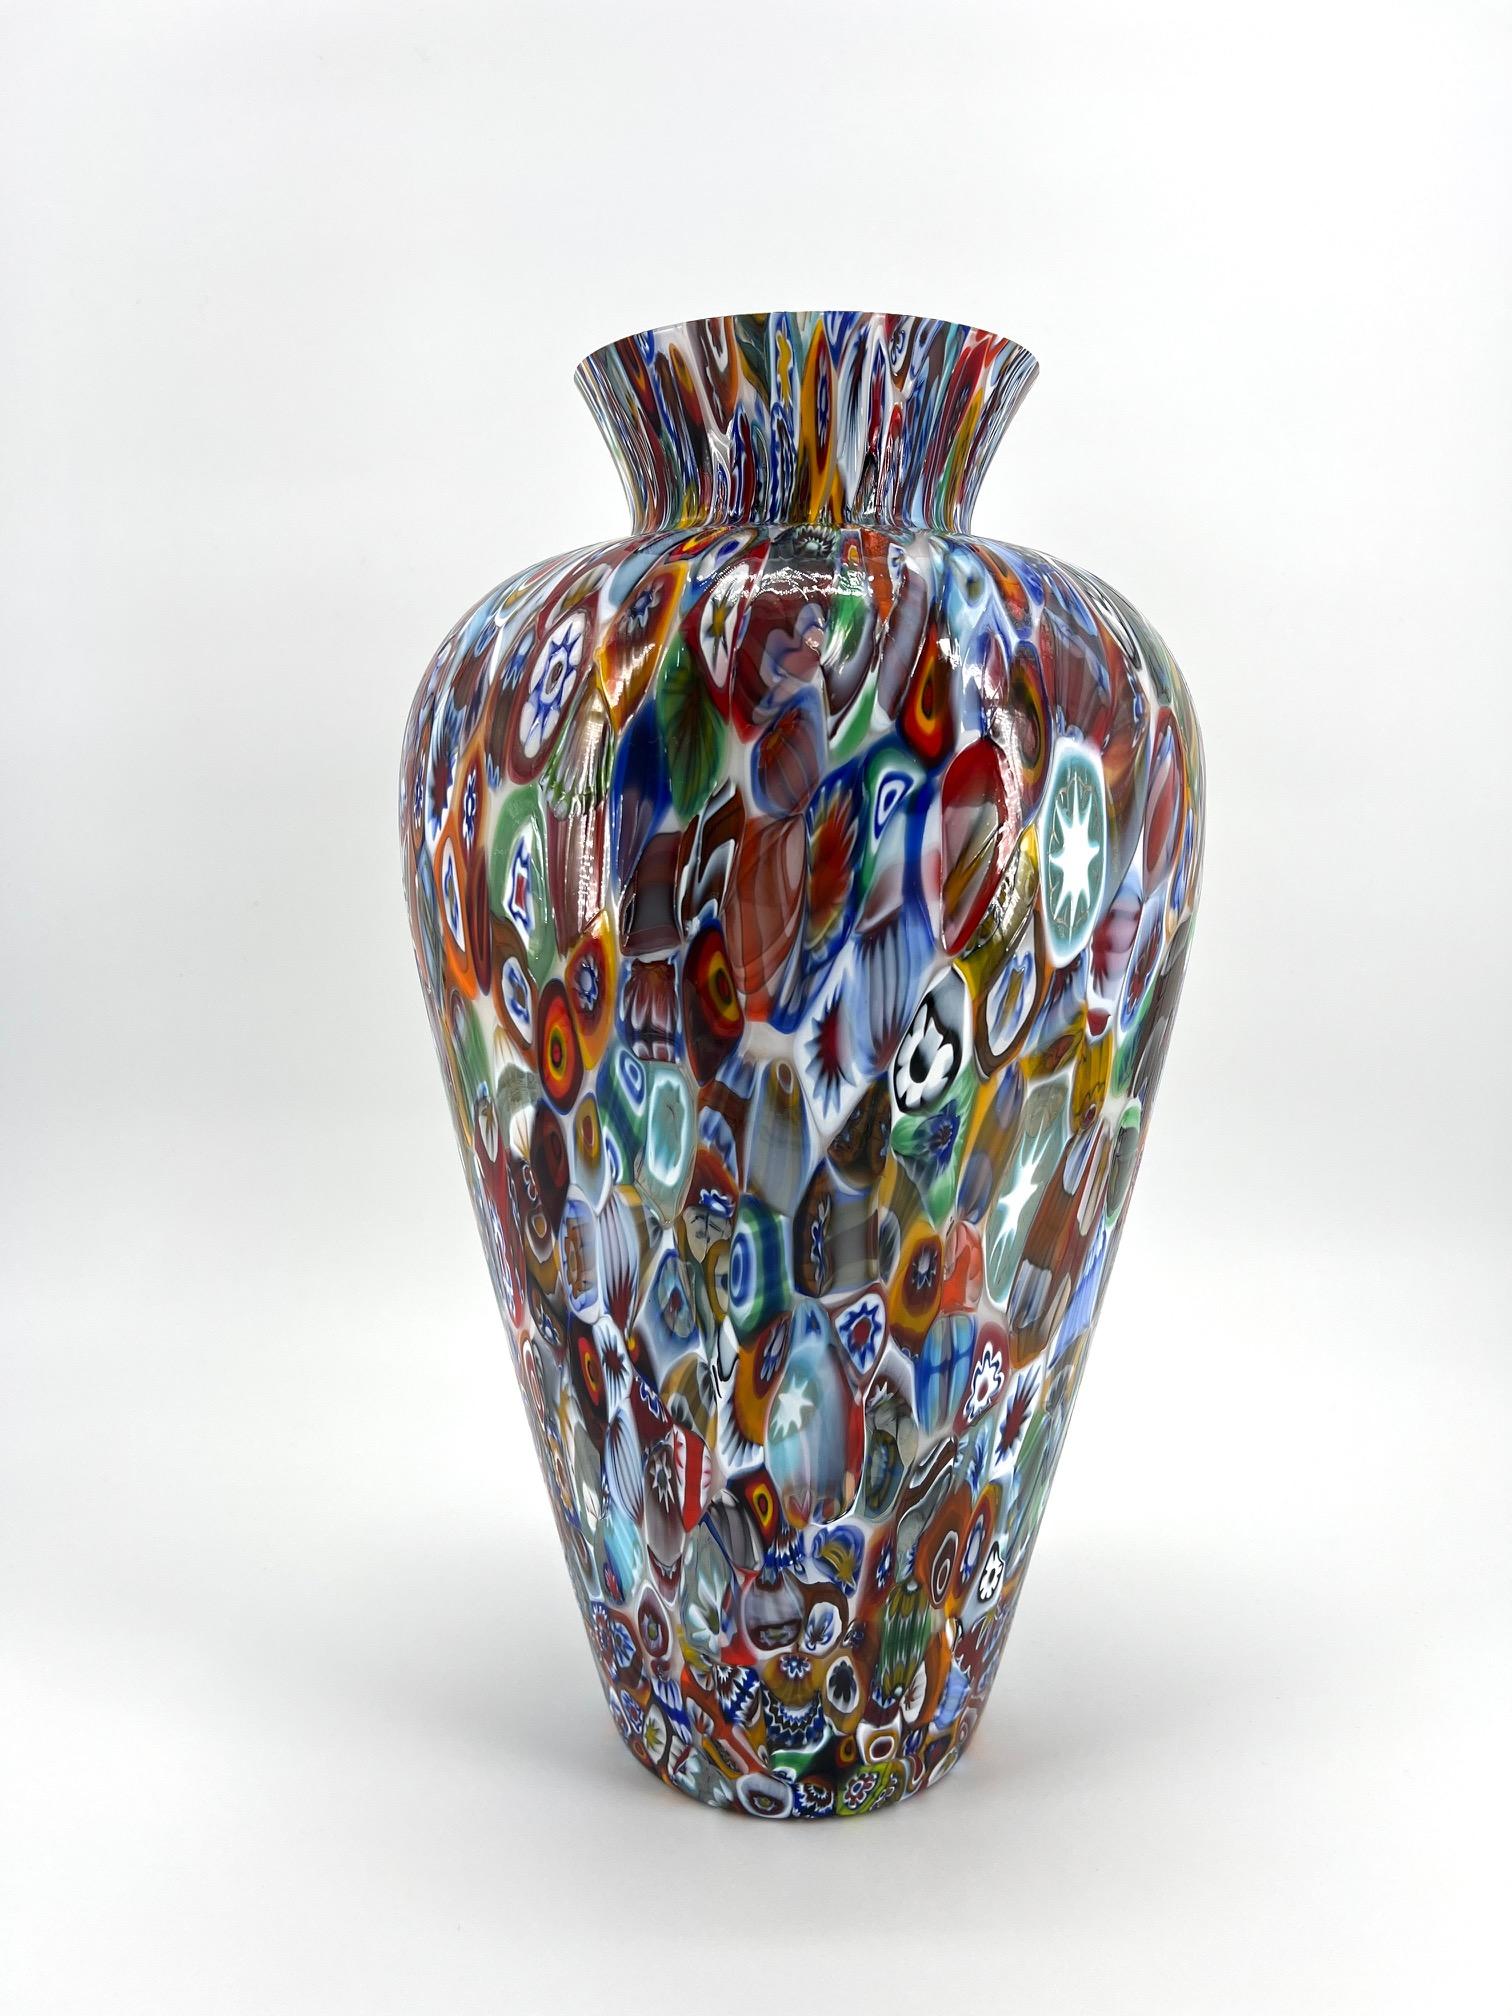 Our goal is to evoke emotions through the creation of unique Murano glass art pieces. This particular art-vase is crafted from inner 